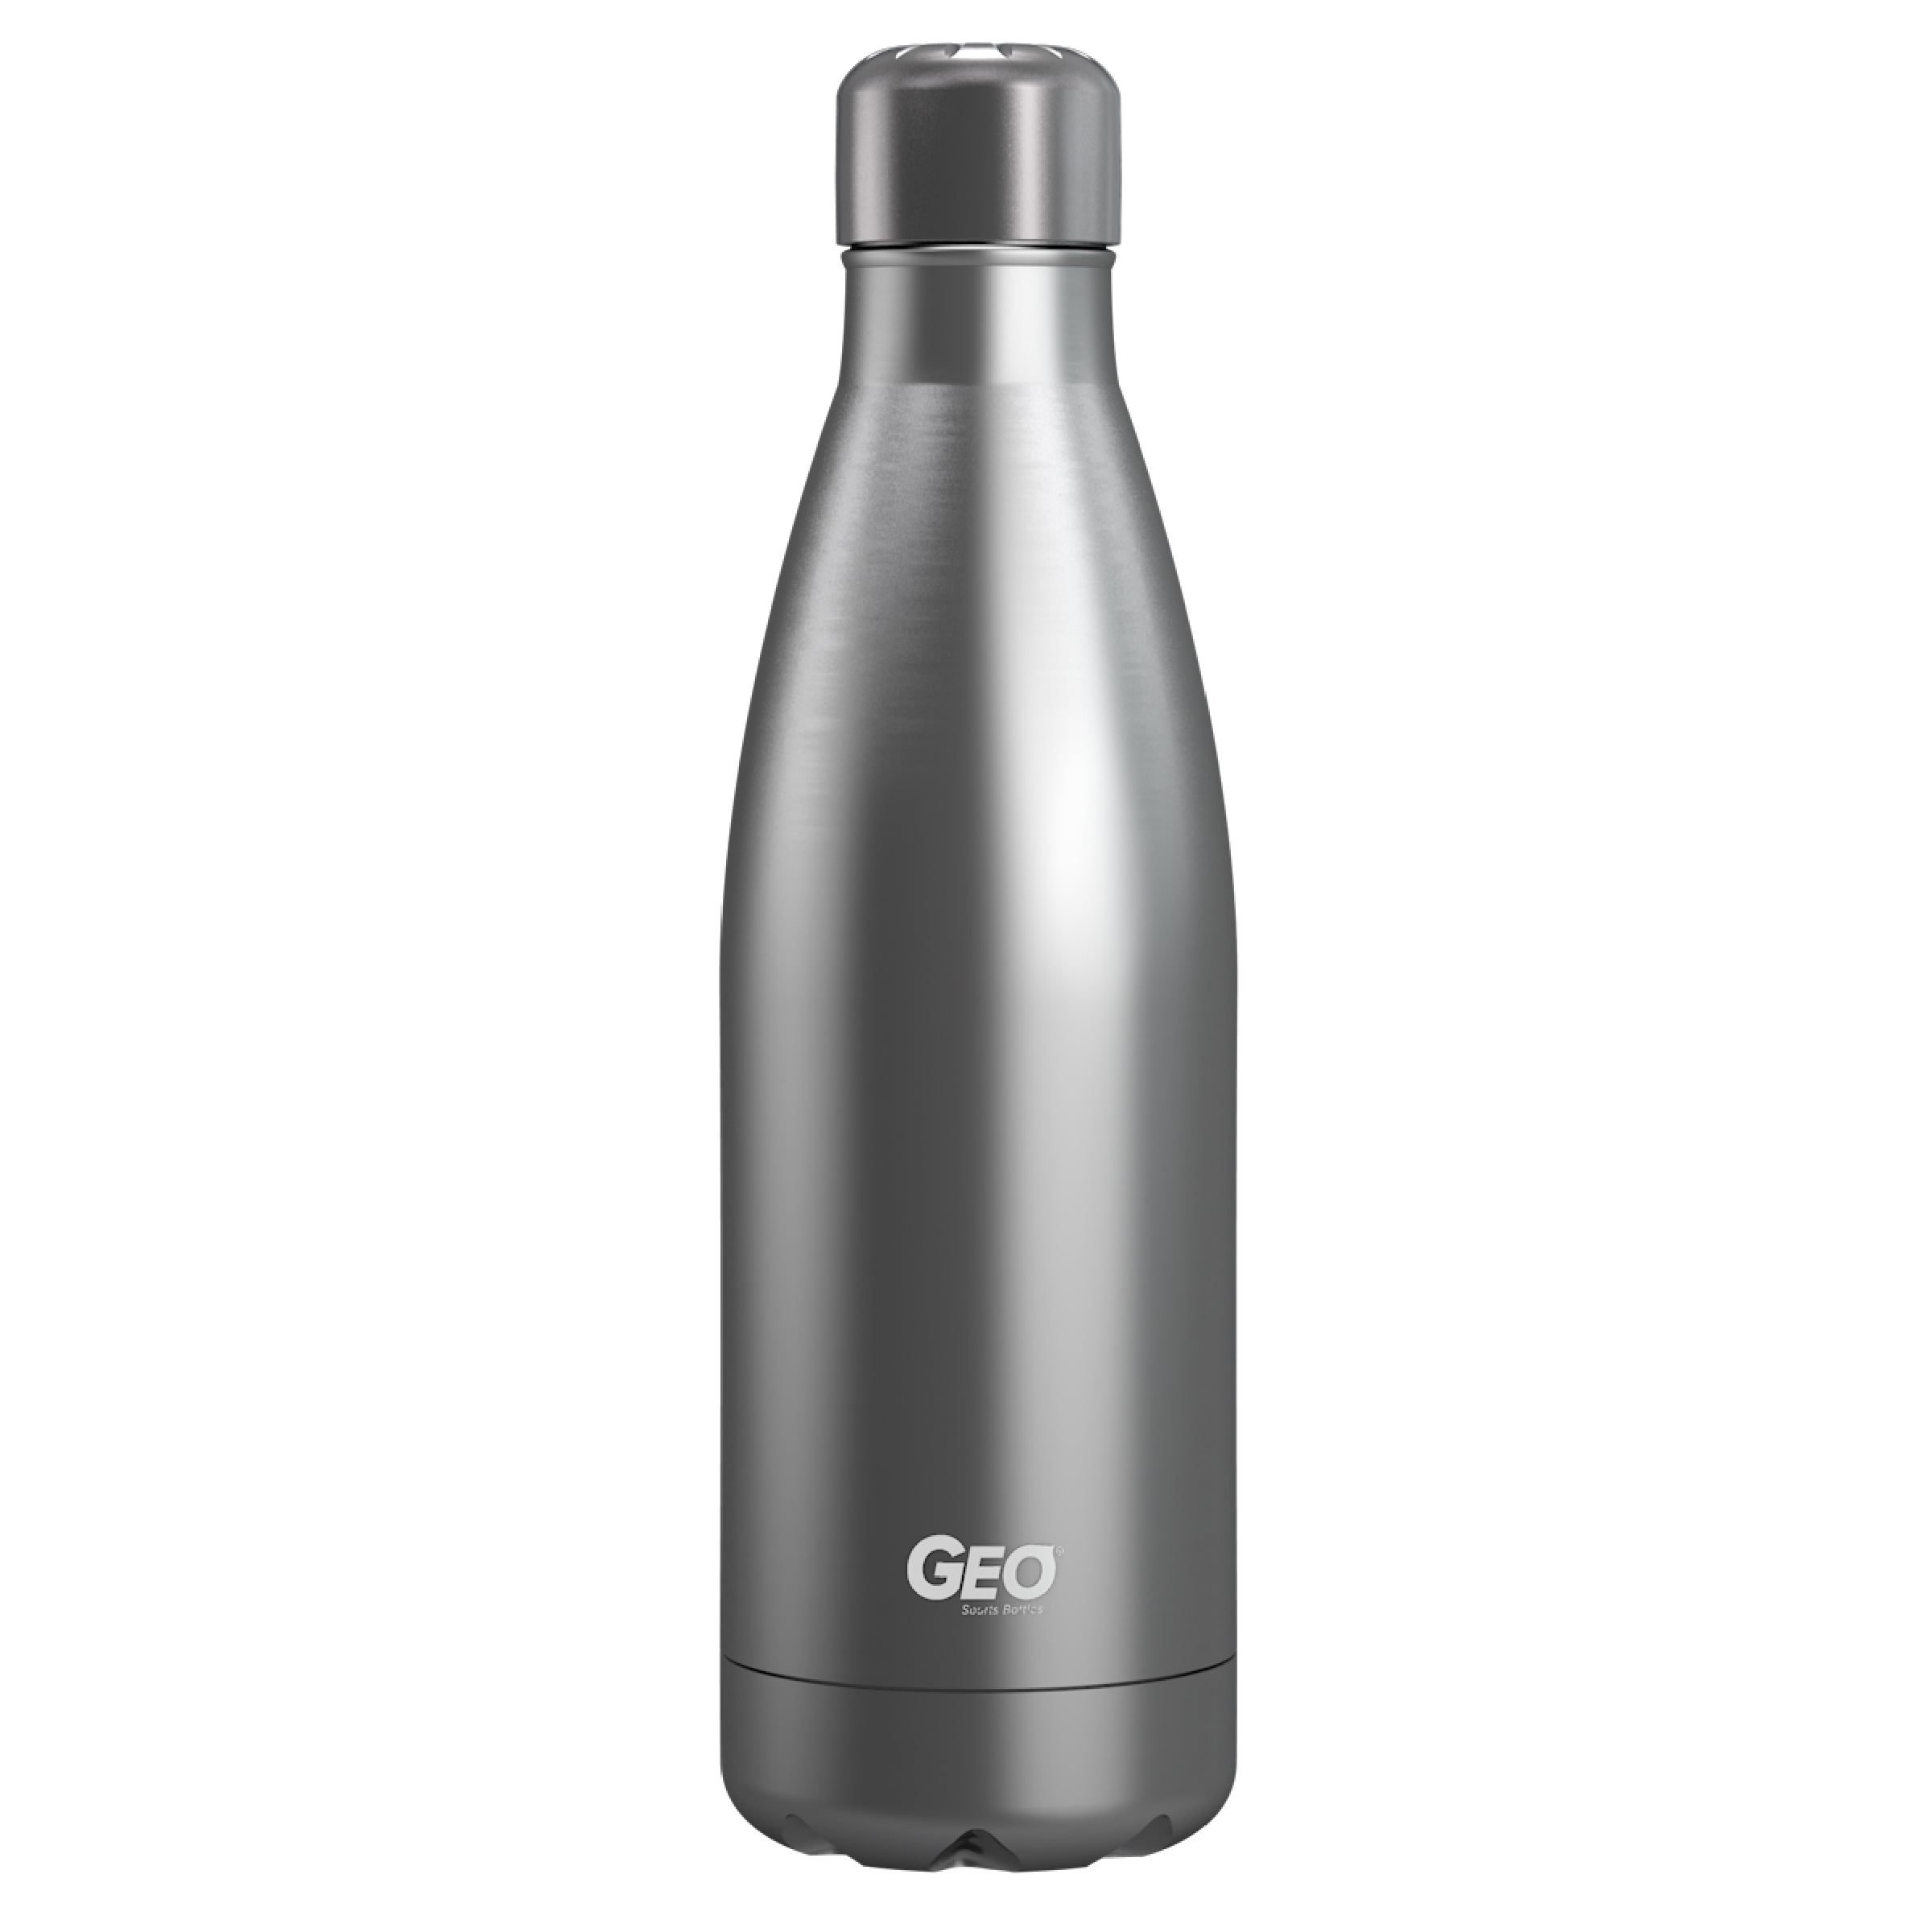 Geo Double Wall Vacuum Insulated Stainless Steel Water Bottle